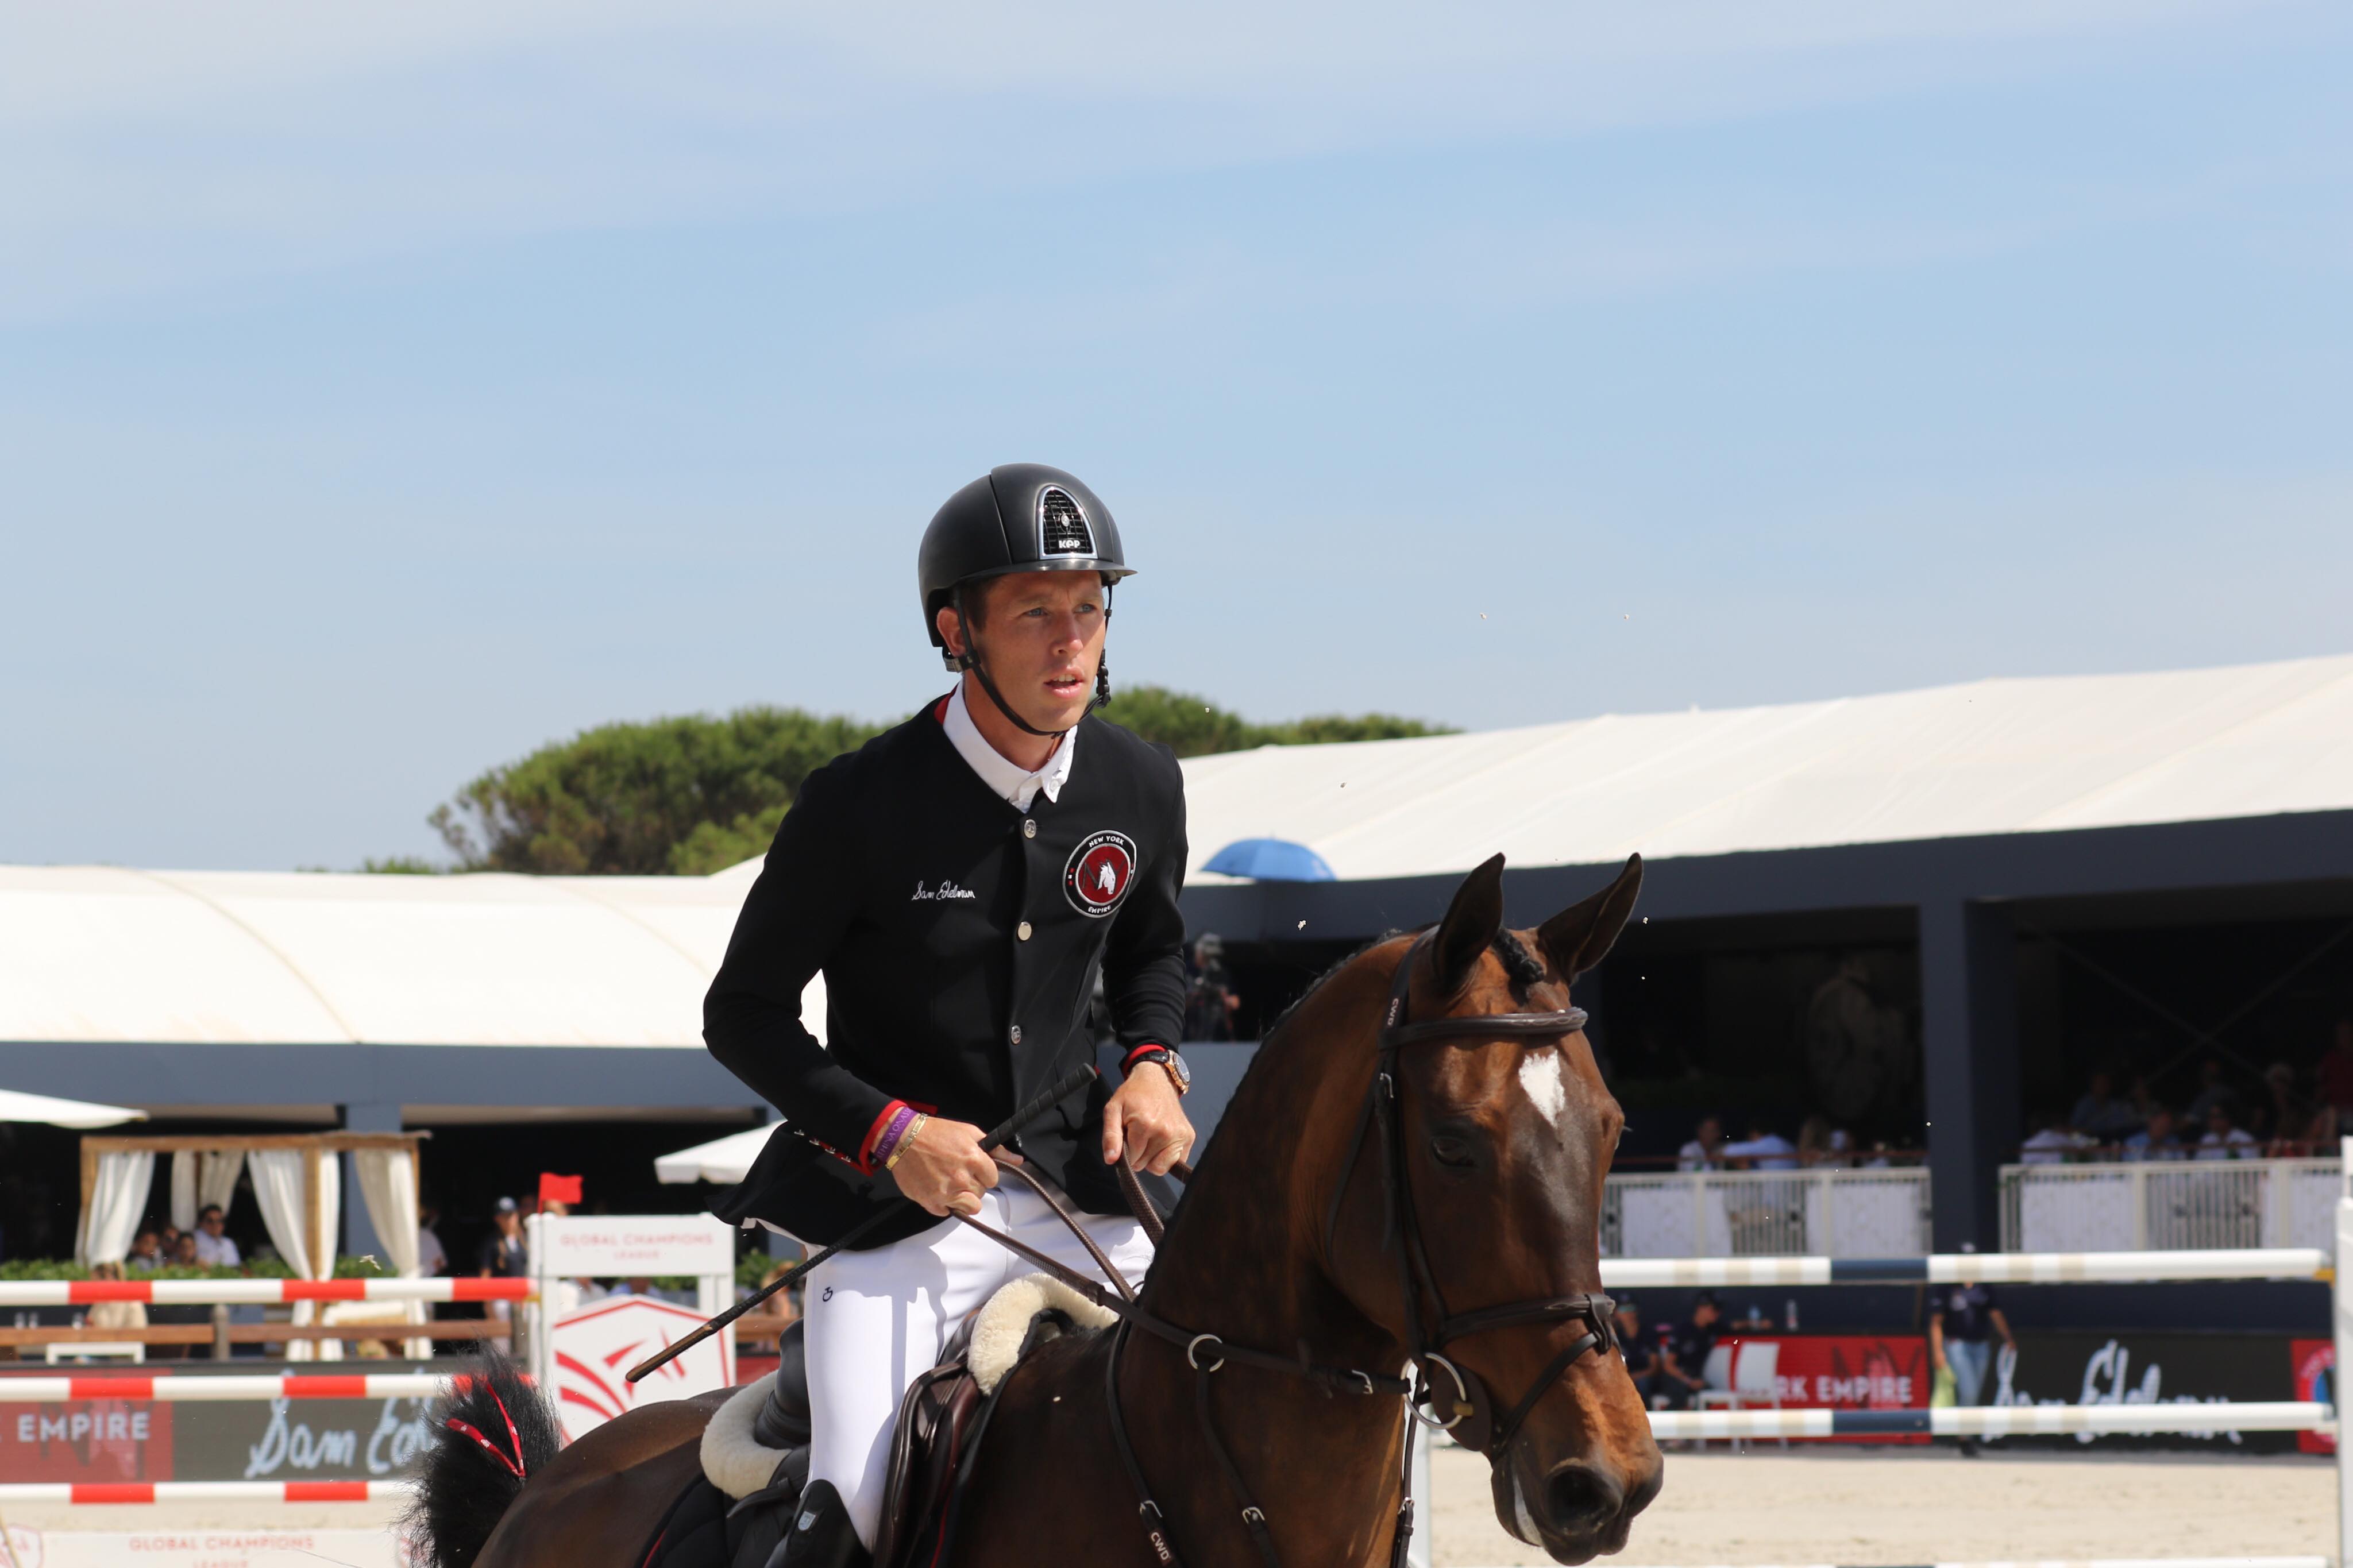 Scott Brash victorious in first Global Champions League in Saint-Tropez - France